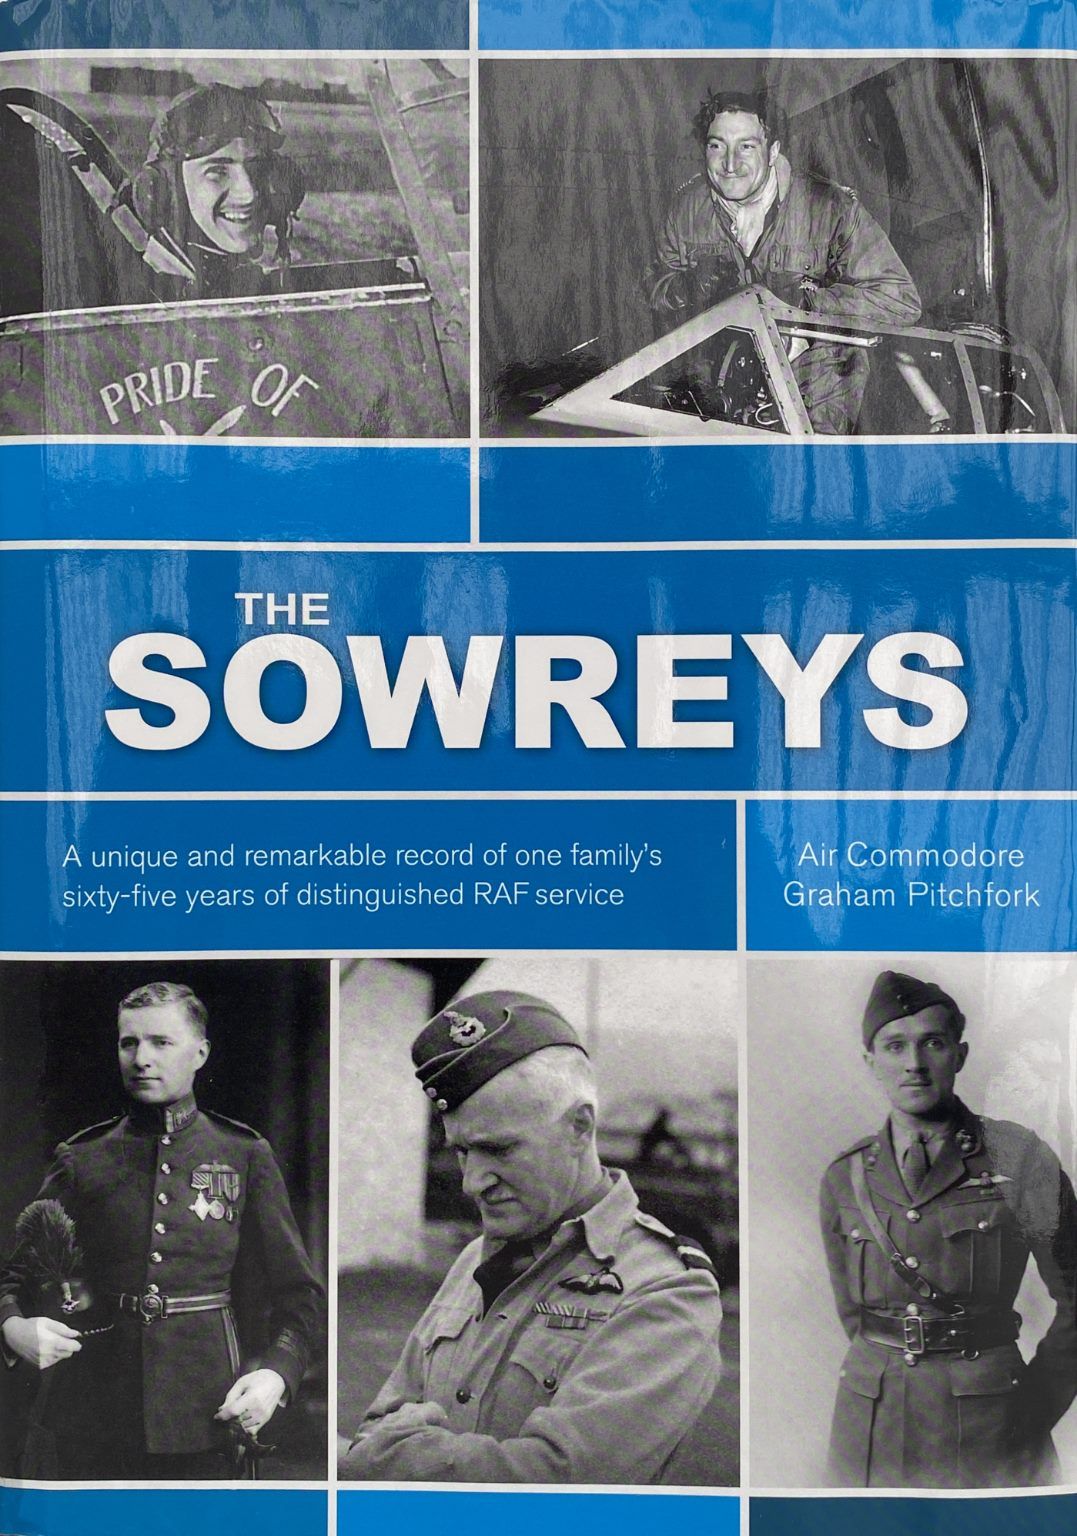 THE SOWREYS by Air Commodore Graham Pitchfork